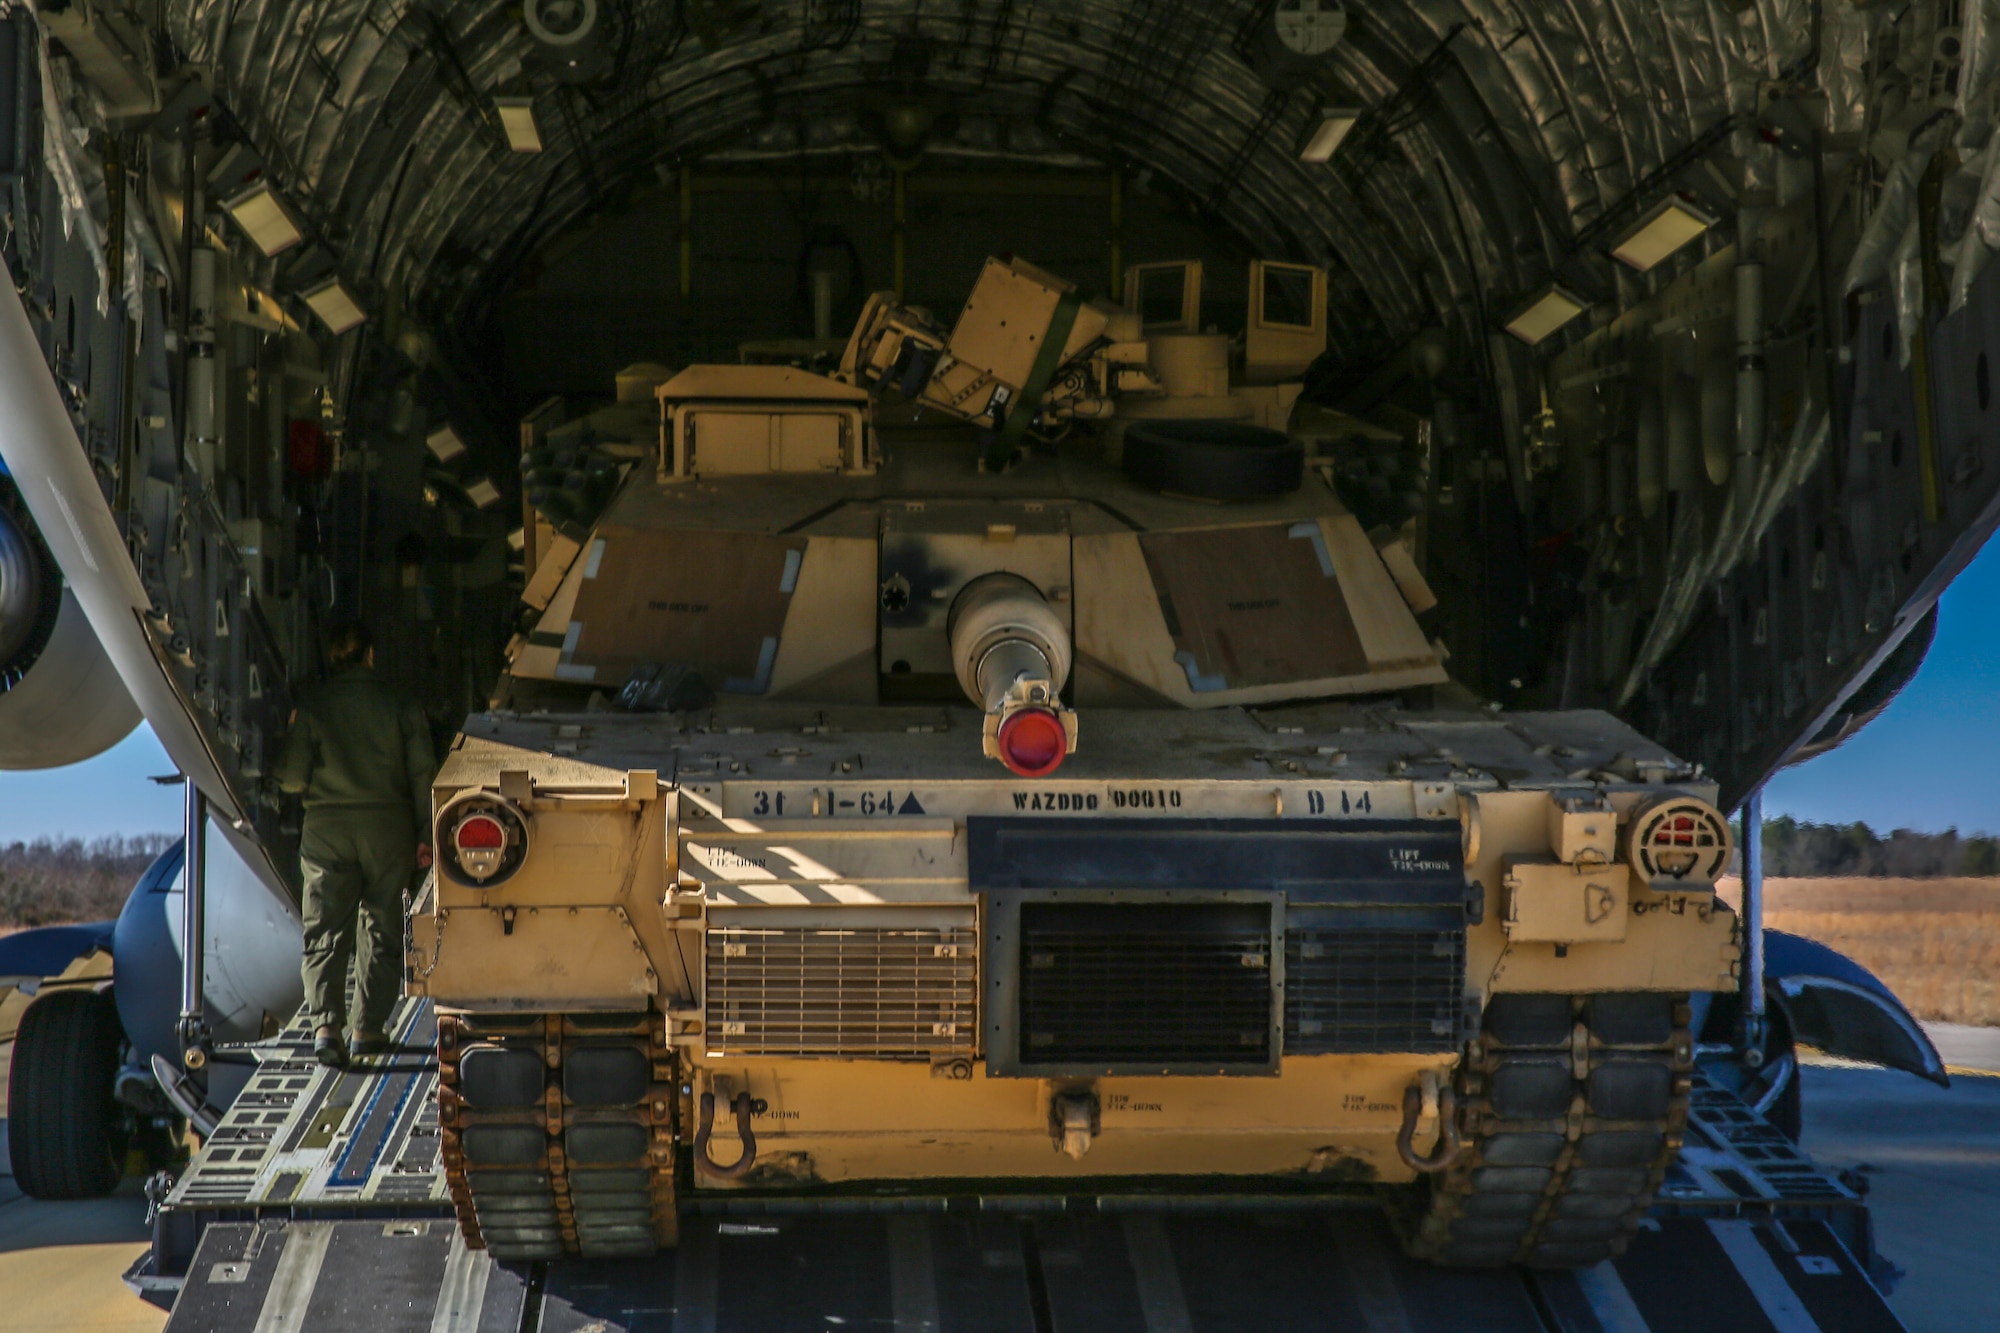 An Abrams M1A2 tank moves up the ramp of a C-17 Globemaster III Dec. 11, 2014 at North Air Force Auxiliary Field in North, S.C. The tank movement was part of a two-day exercise which integrated C-17 air and ground crew training for 315th Airlift Wing Airmen stationed at Joint Base Charleston, S.C. as well as Soldiers from one of the 3rd Infantry Division’s Immediate Ready Companies stationed at Fort Stewart, Ga. Four C-17’s were used during the exercise to deploy and redeploy two Abrams M1A2 tanks, an M88 recovery vehicle and two M2A3 Bradley Fighting Vehicles. (U.S. Air Force photo by Tech. Sgt. Shane Ellis)